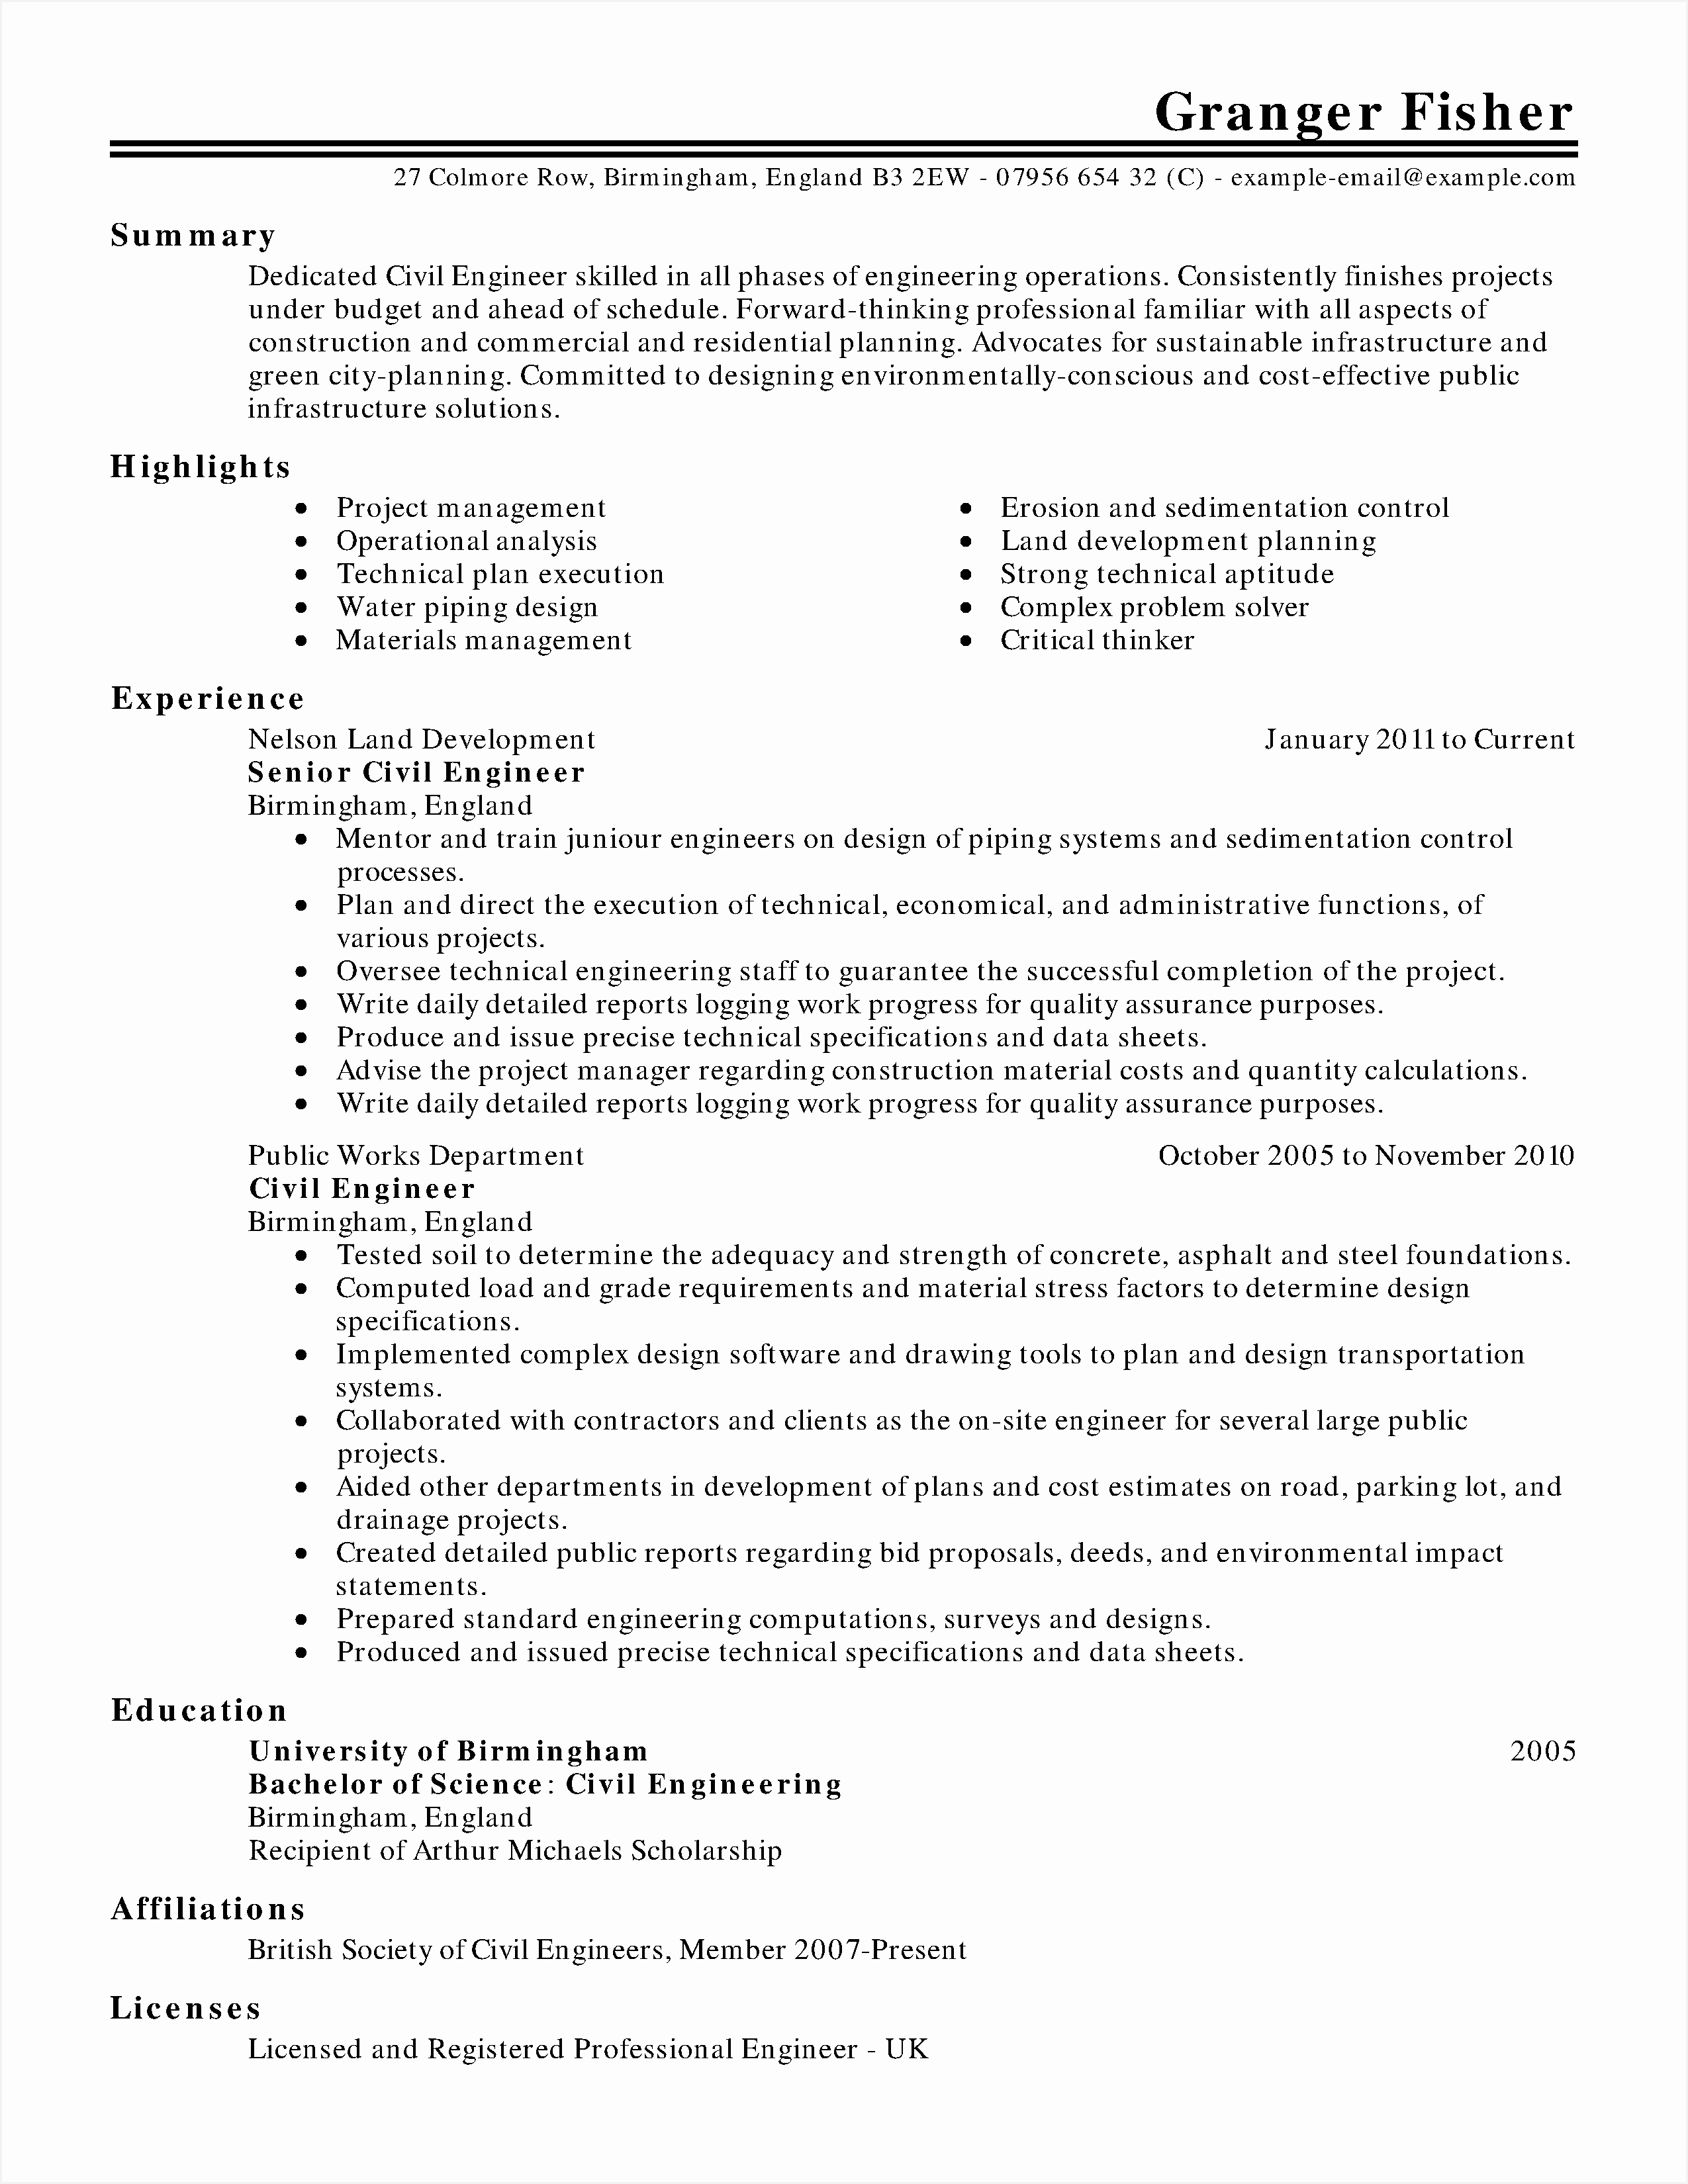 Resume Templates Free Word Lovely Resume format for Freshers Free Download Latest Best Od33002550